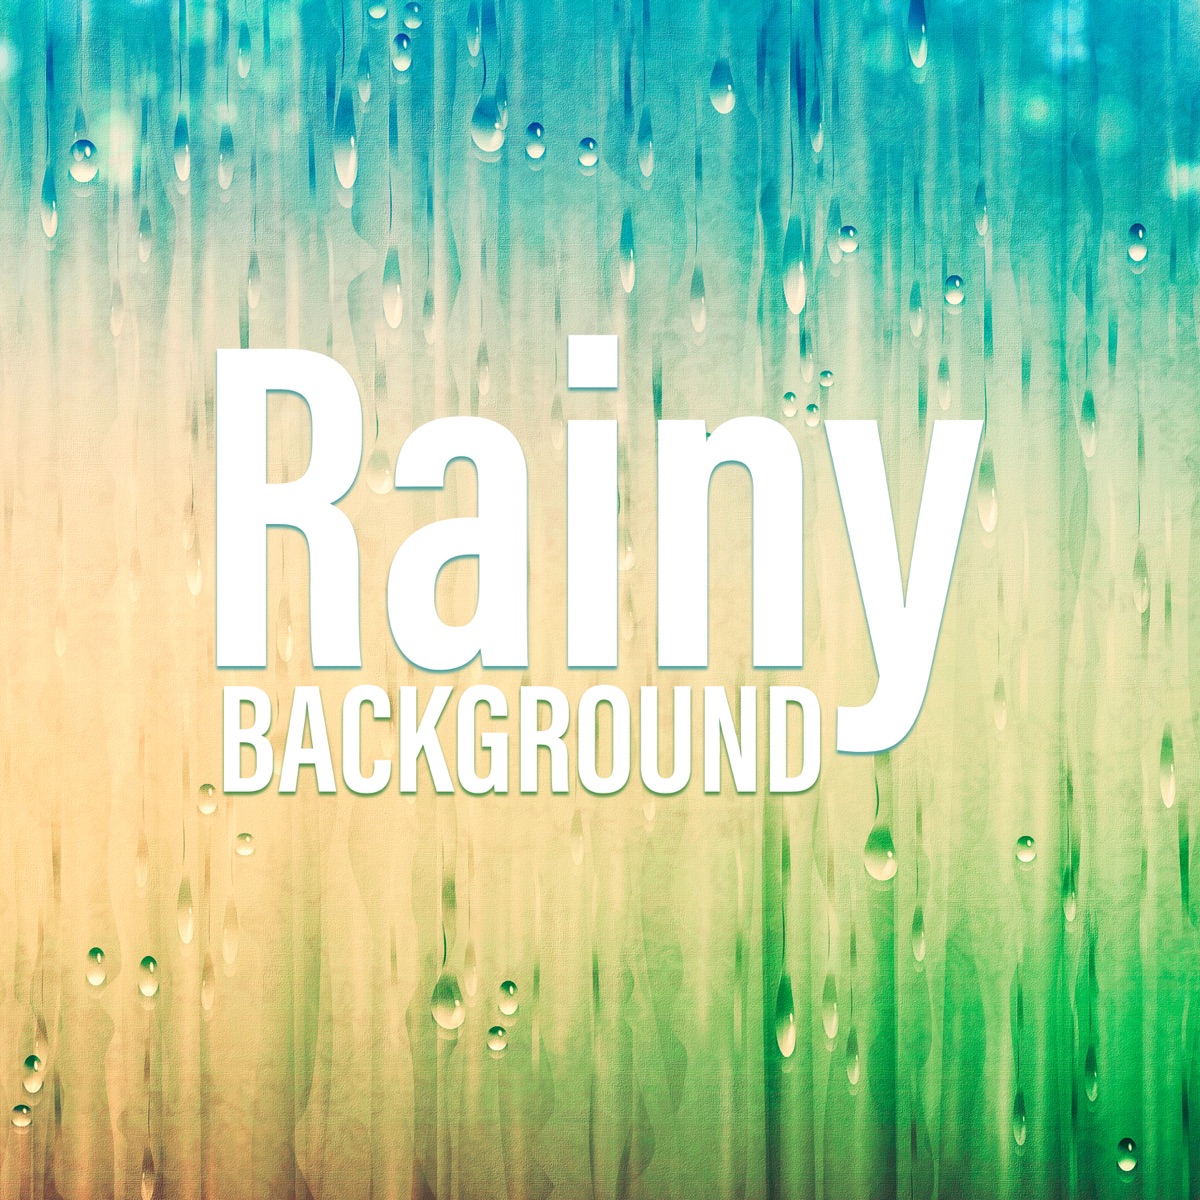 Rain Sounds for Sleeping: Best Selection of Relaxing Background Music,  Gentle Night Rain for Insomnia, Meditation, Peace, Spa, Yoga by Healing Rain  Sound Academy on Apple Music